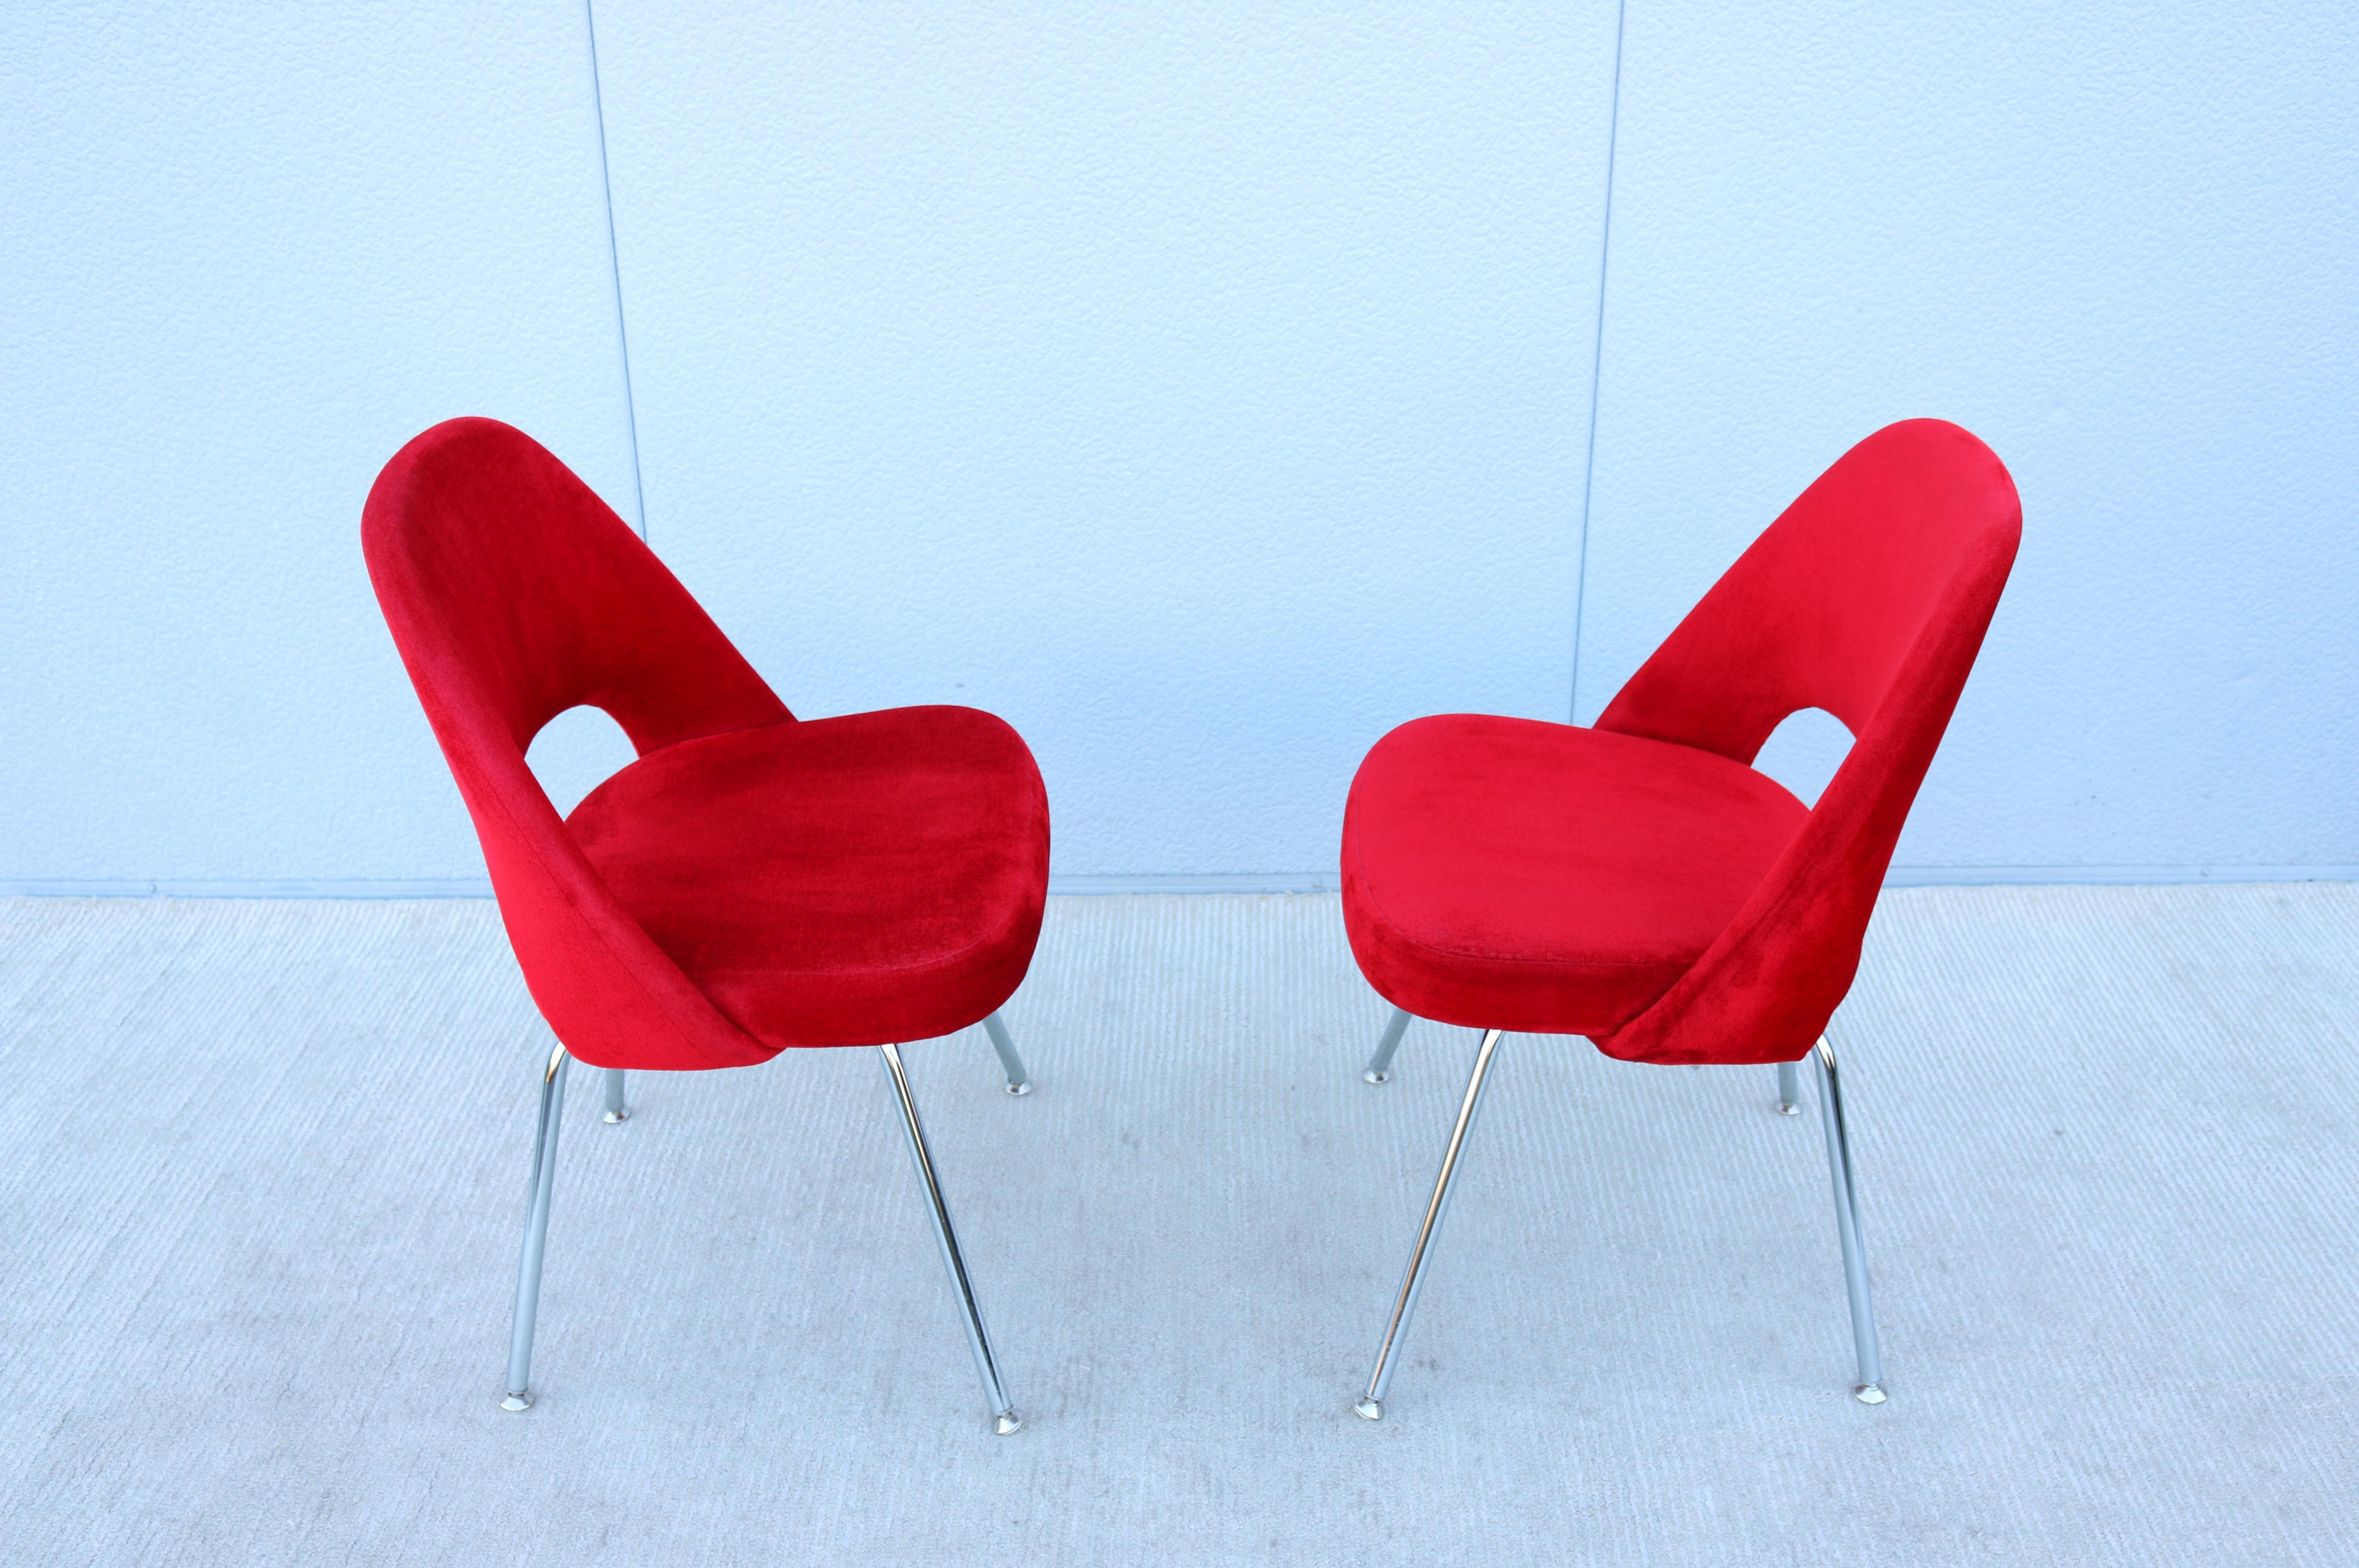 Mid-Century Modern Eero Saarinen for Knoll Red Executive Armless Chairs - a Pair For Sale 5